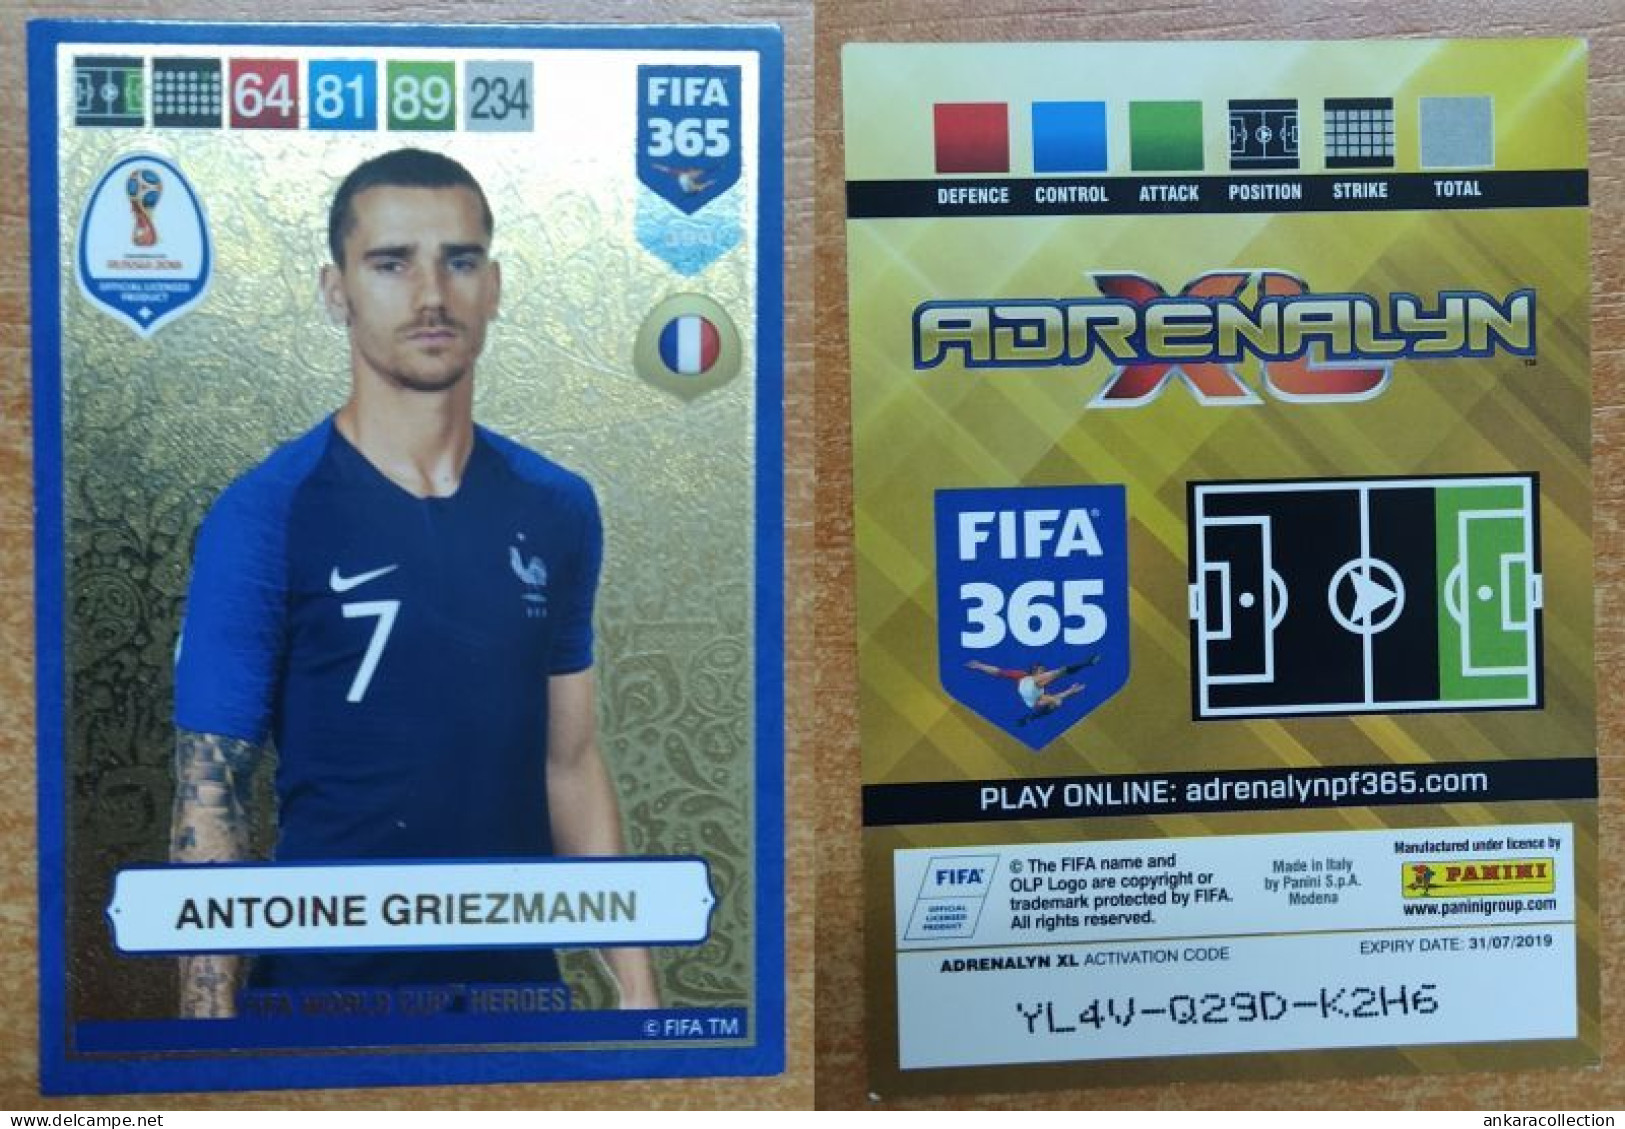 AC - 394 ANTOINE GRIEZMANN  FIFA WORLD CUP HEROES  RUSSIA 2018  PANINI FIFA 365 2019 ADRENALYN TRADING CARD - Trading-Karten